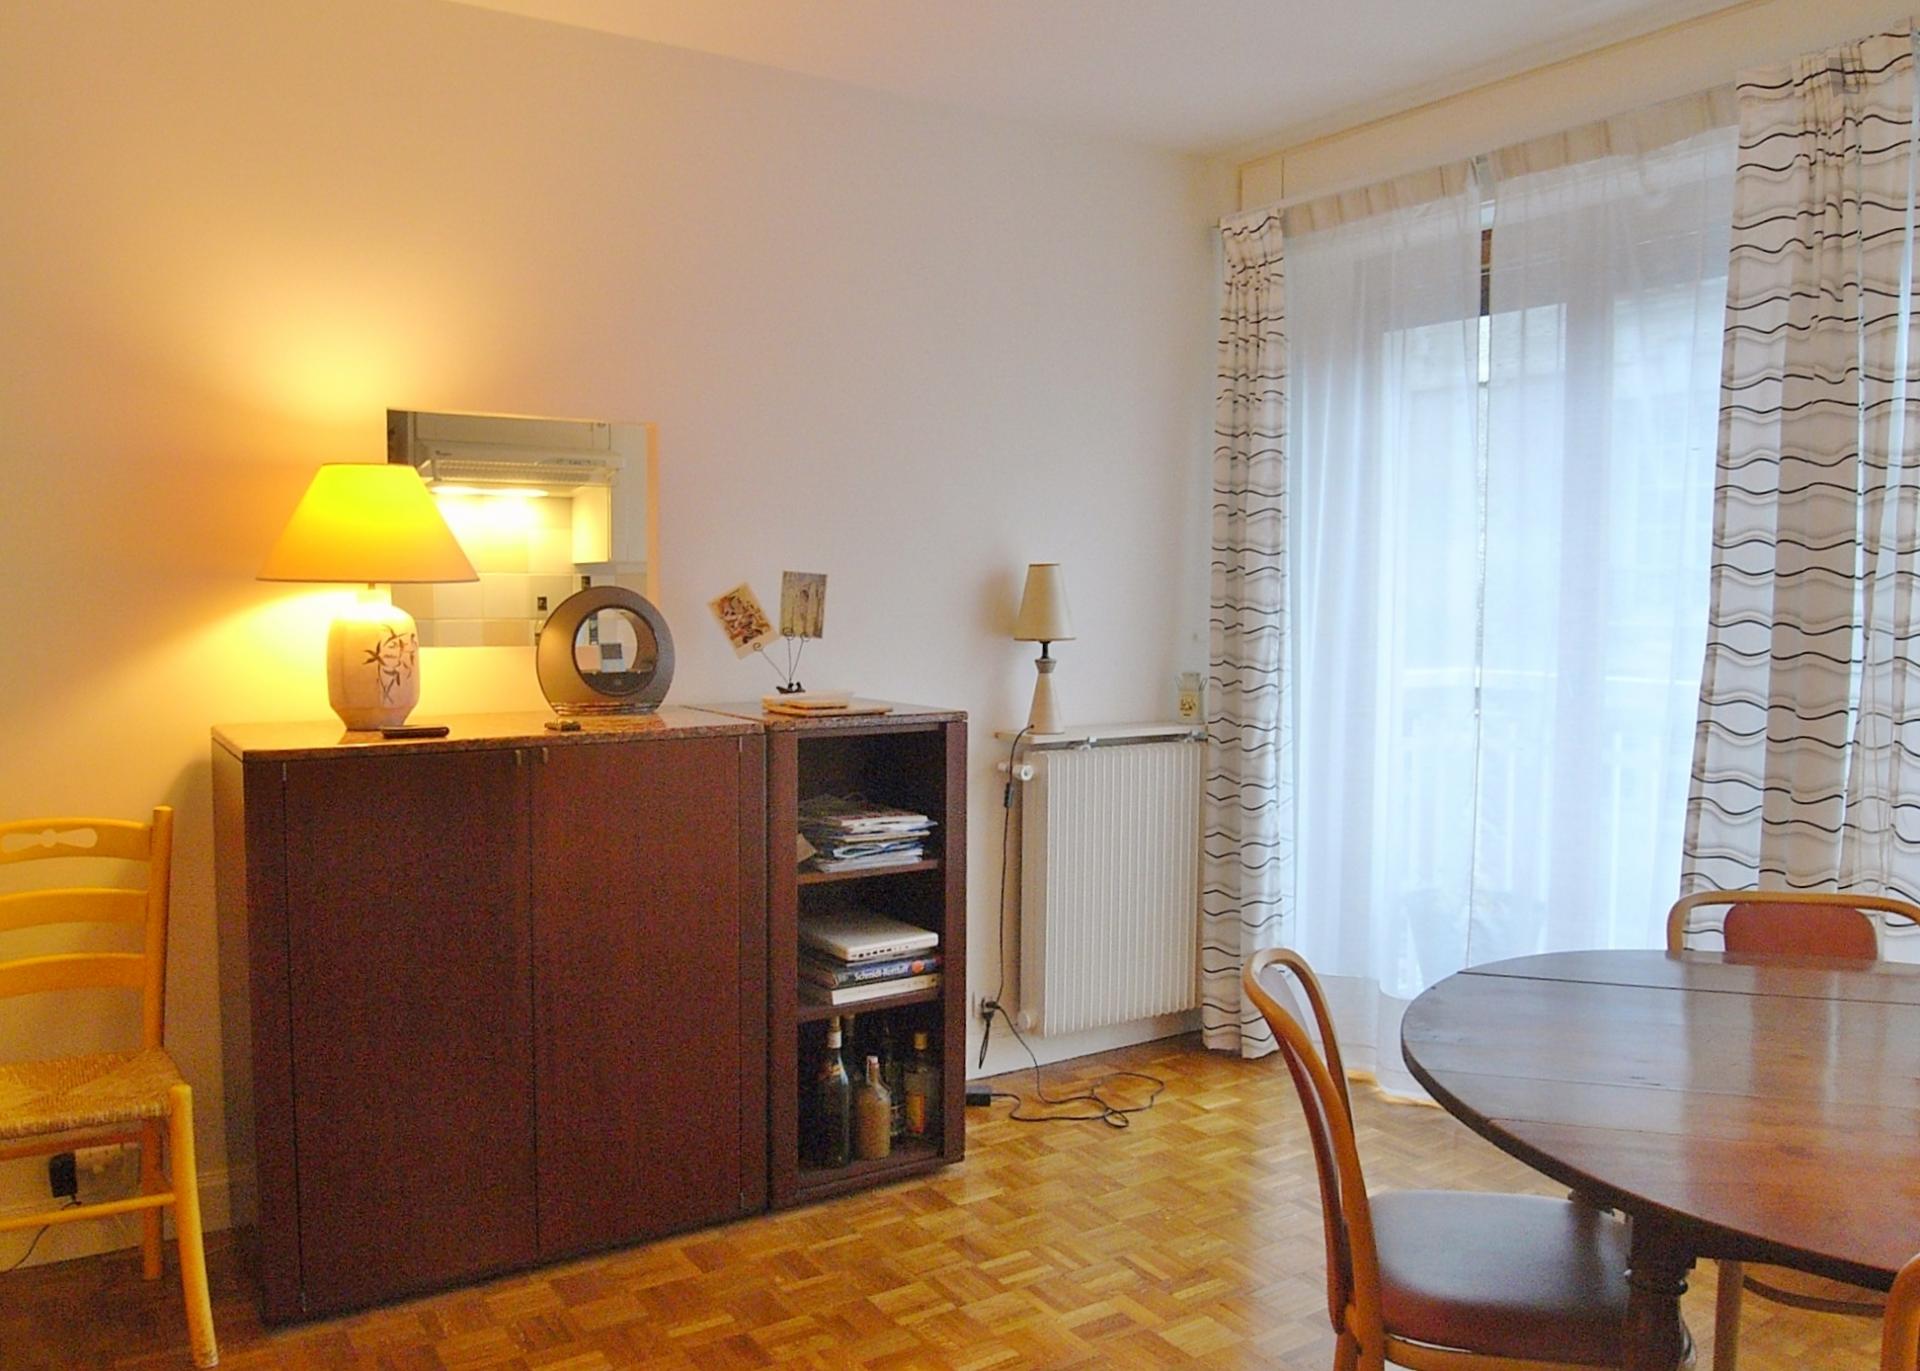 D'Alesia - Nice flat for expats in Paris